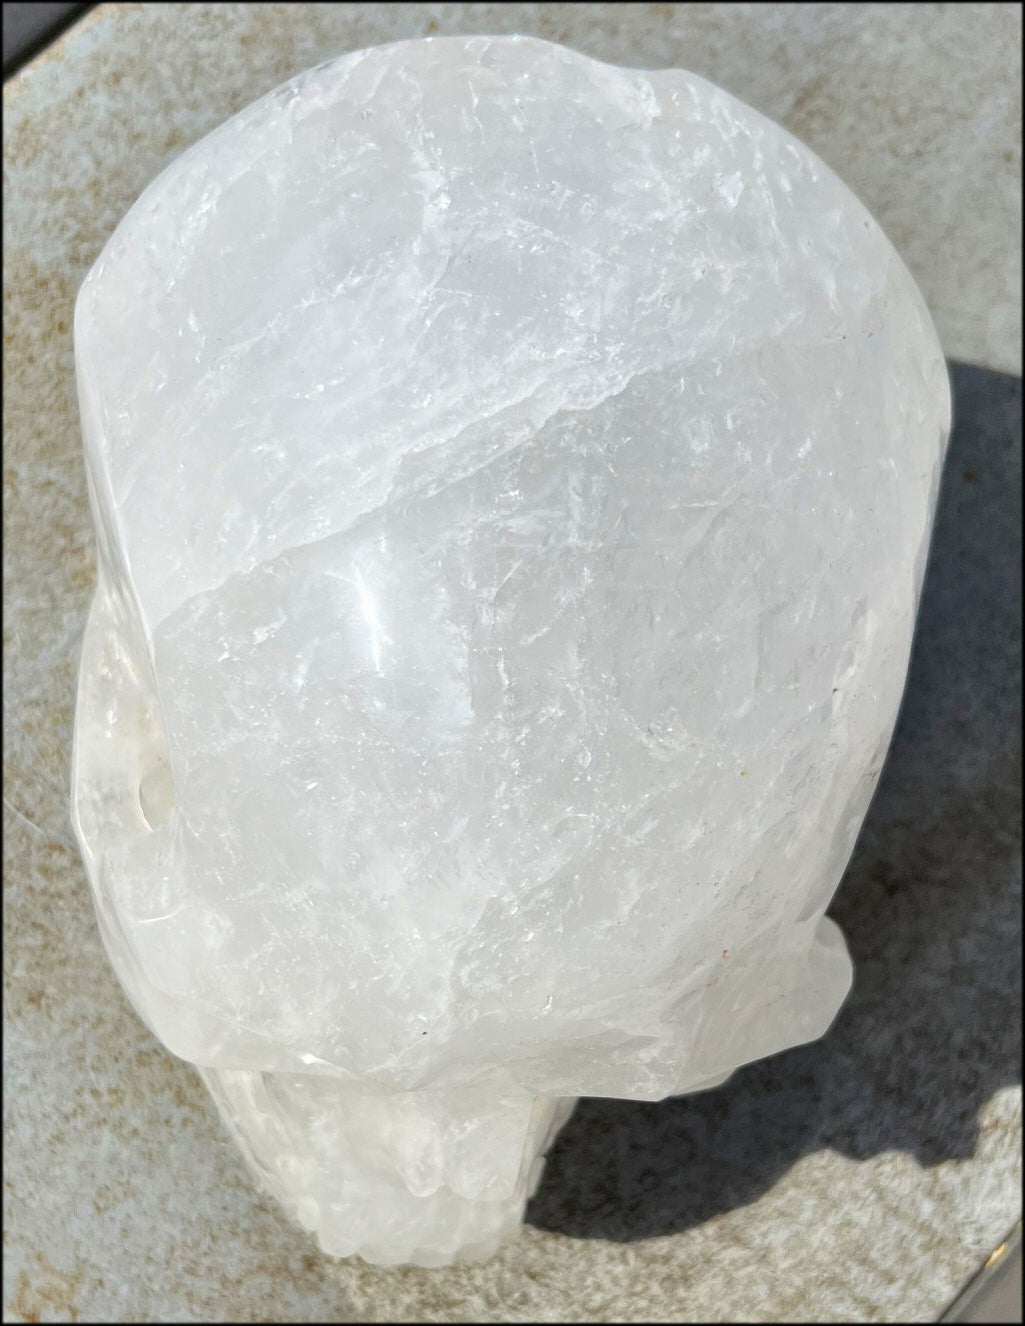 ~SUPER SIZED~ Himalayan Quartz Crystal Skull with Gorgeous Multi-Colored Hematite, Rainbows - 25lbs+